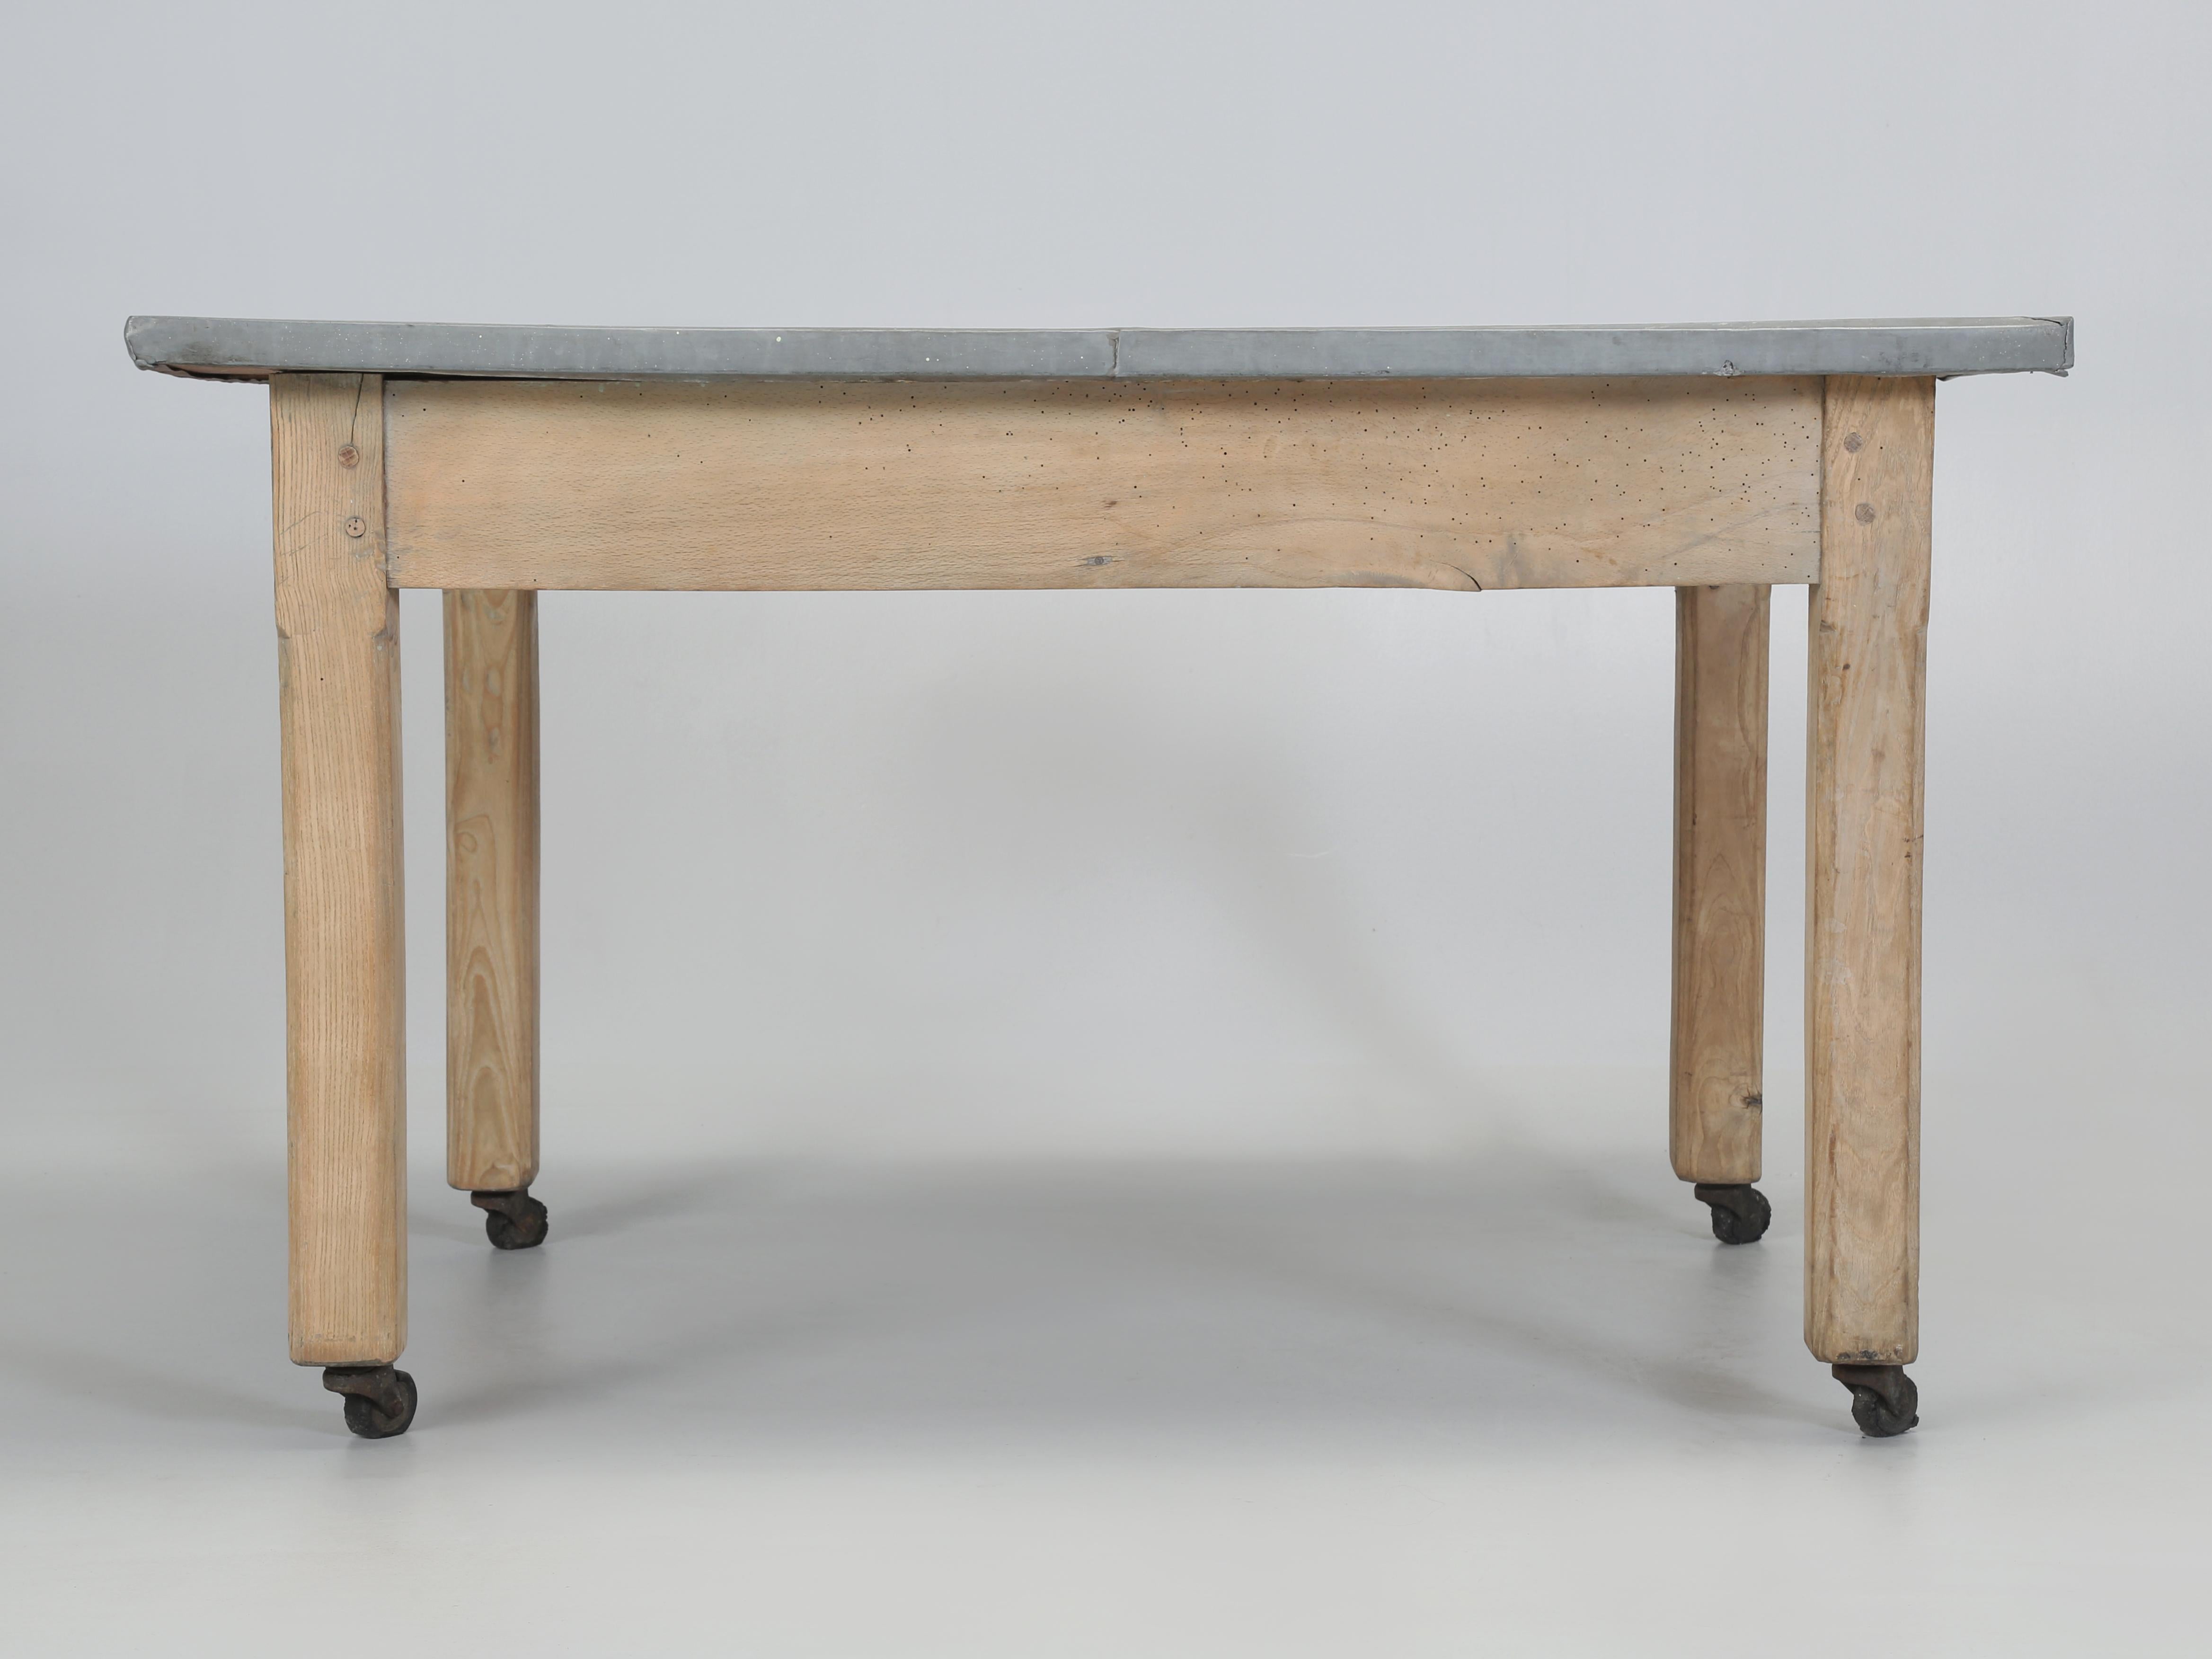 Antique European Work Table, Garden or Kitchen Table with Old Zinc Top 1920's For Sale 6